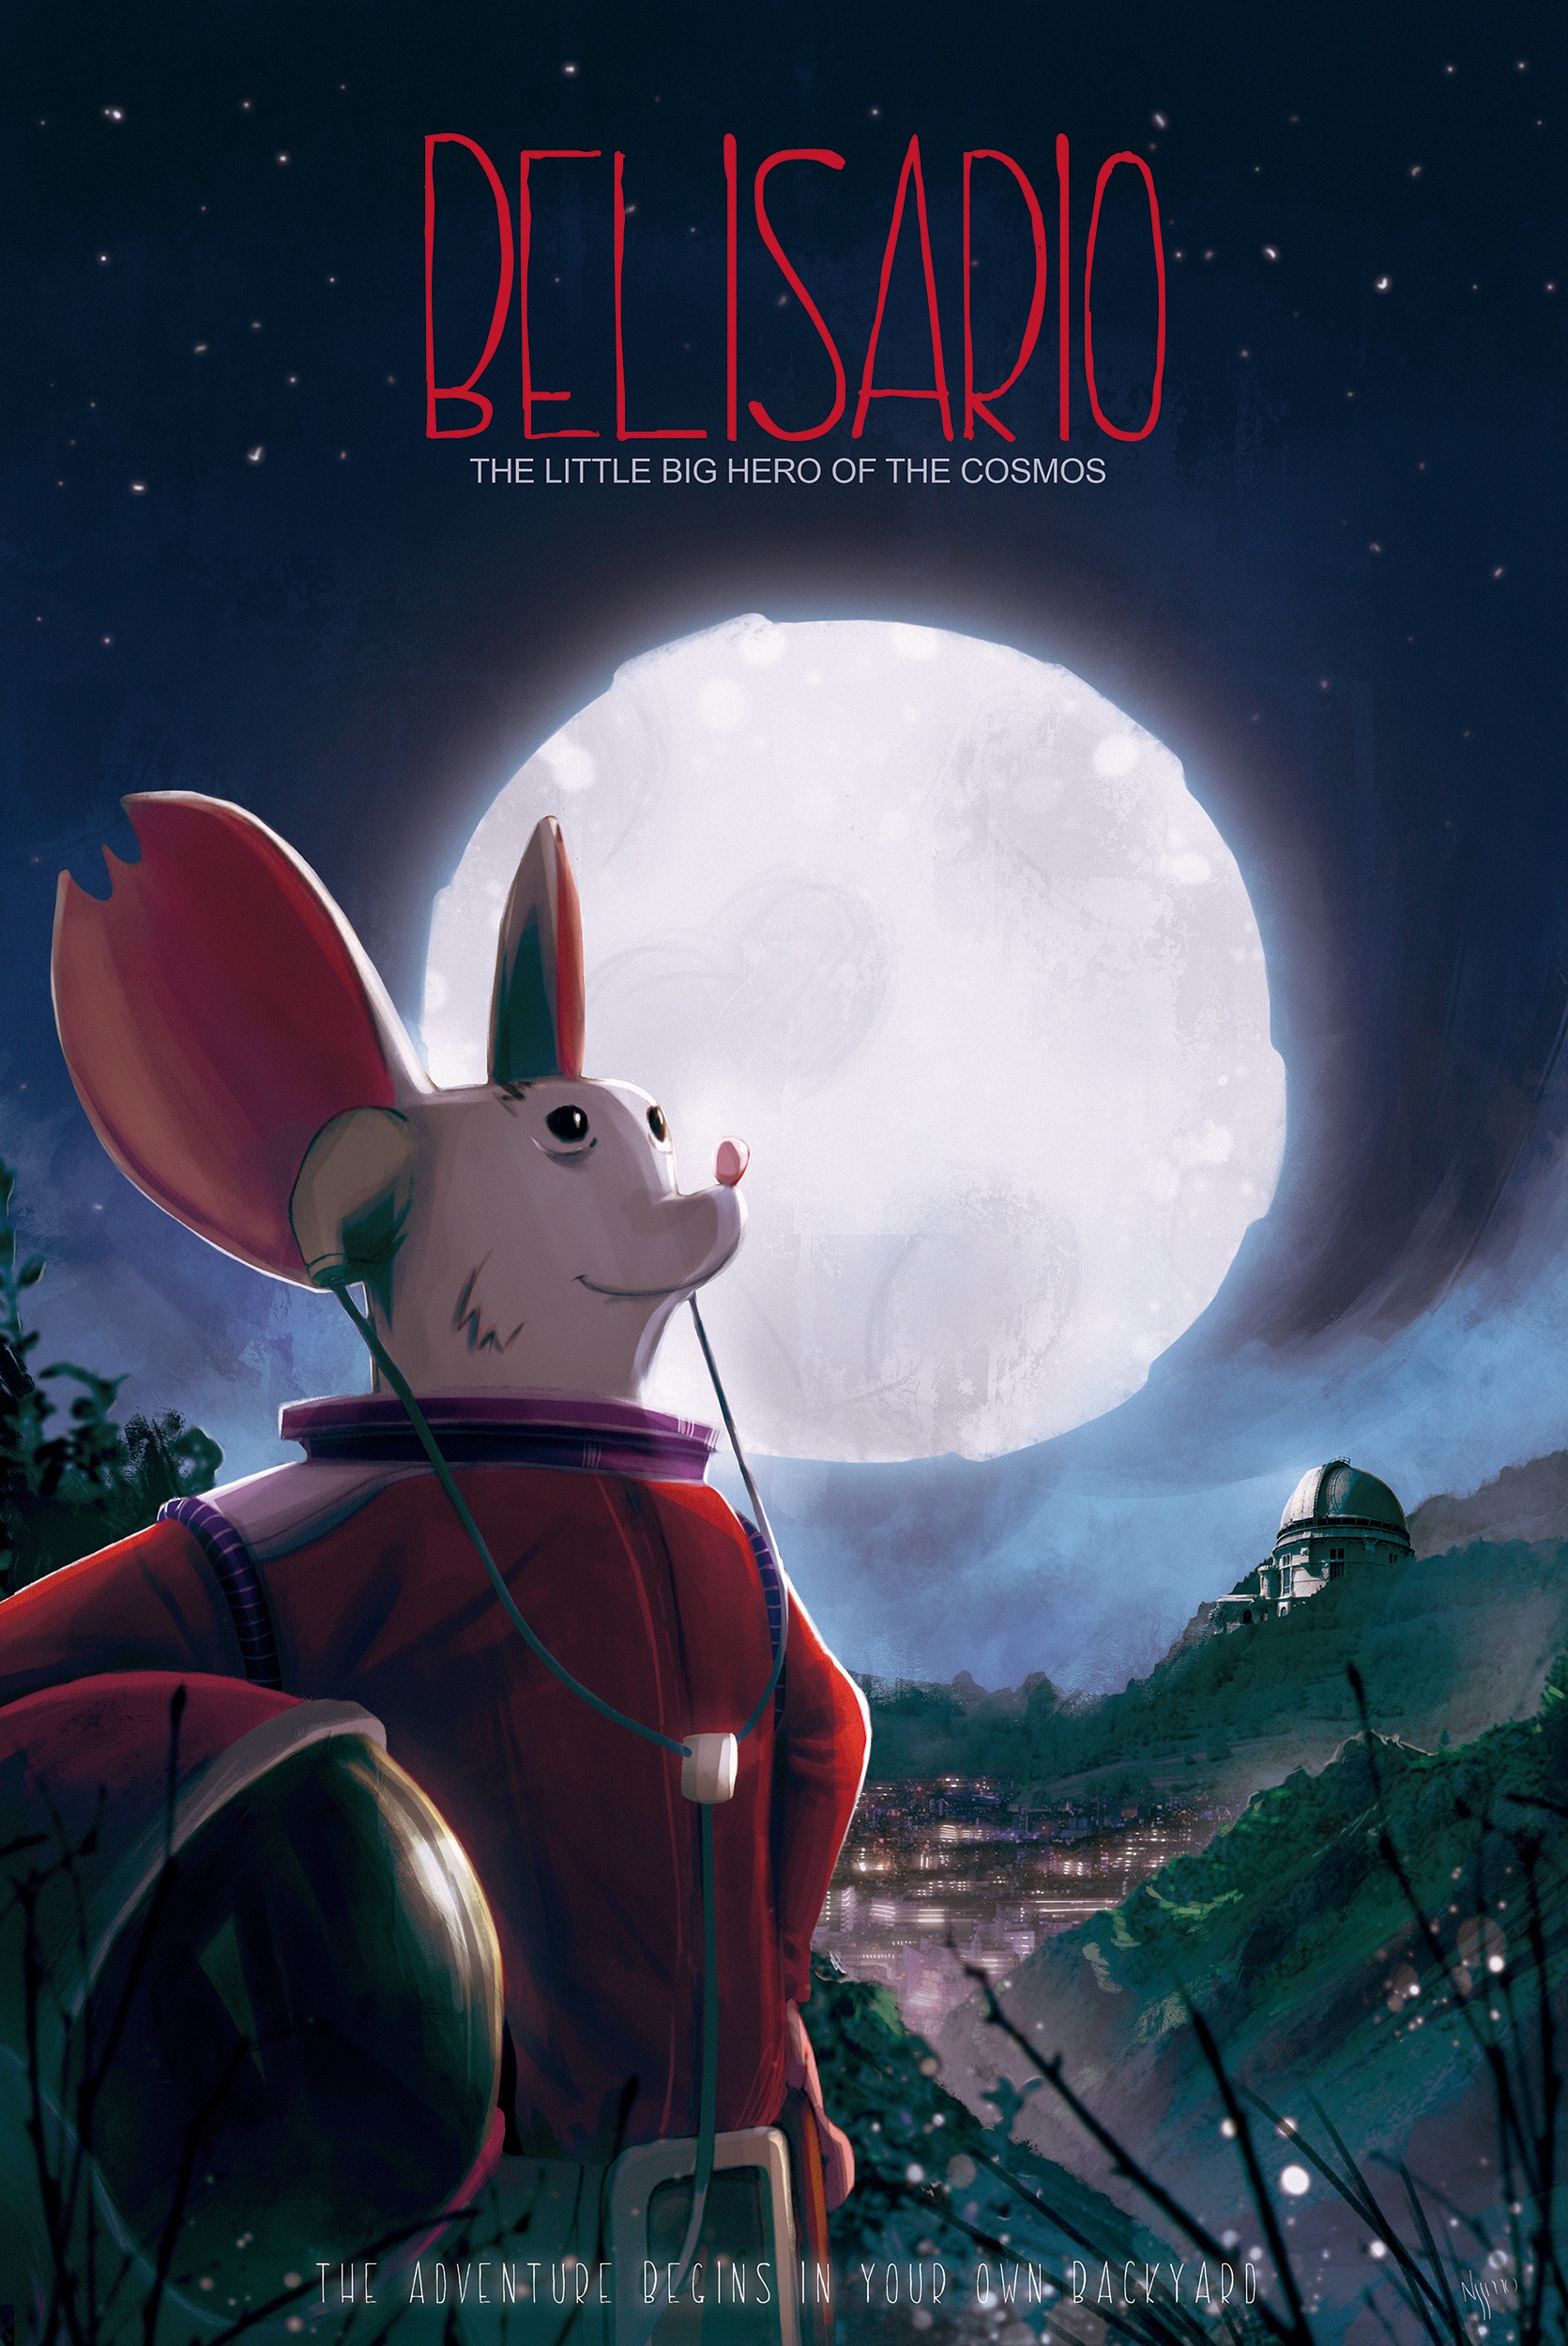 Mega Sized Movie Poster Image for Belisario - The Little Big Hero of the Cosmos 